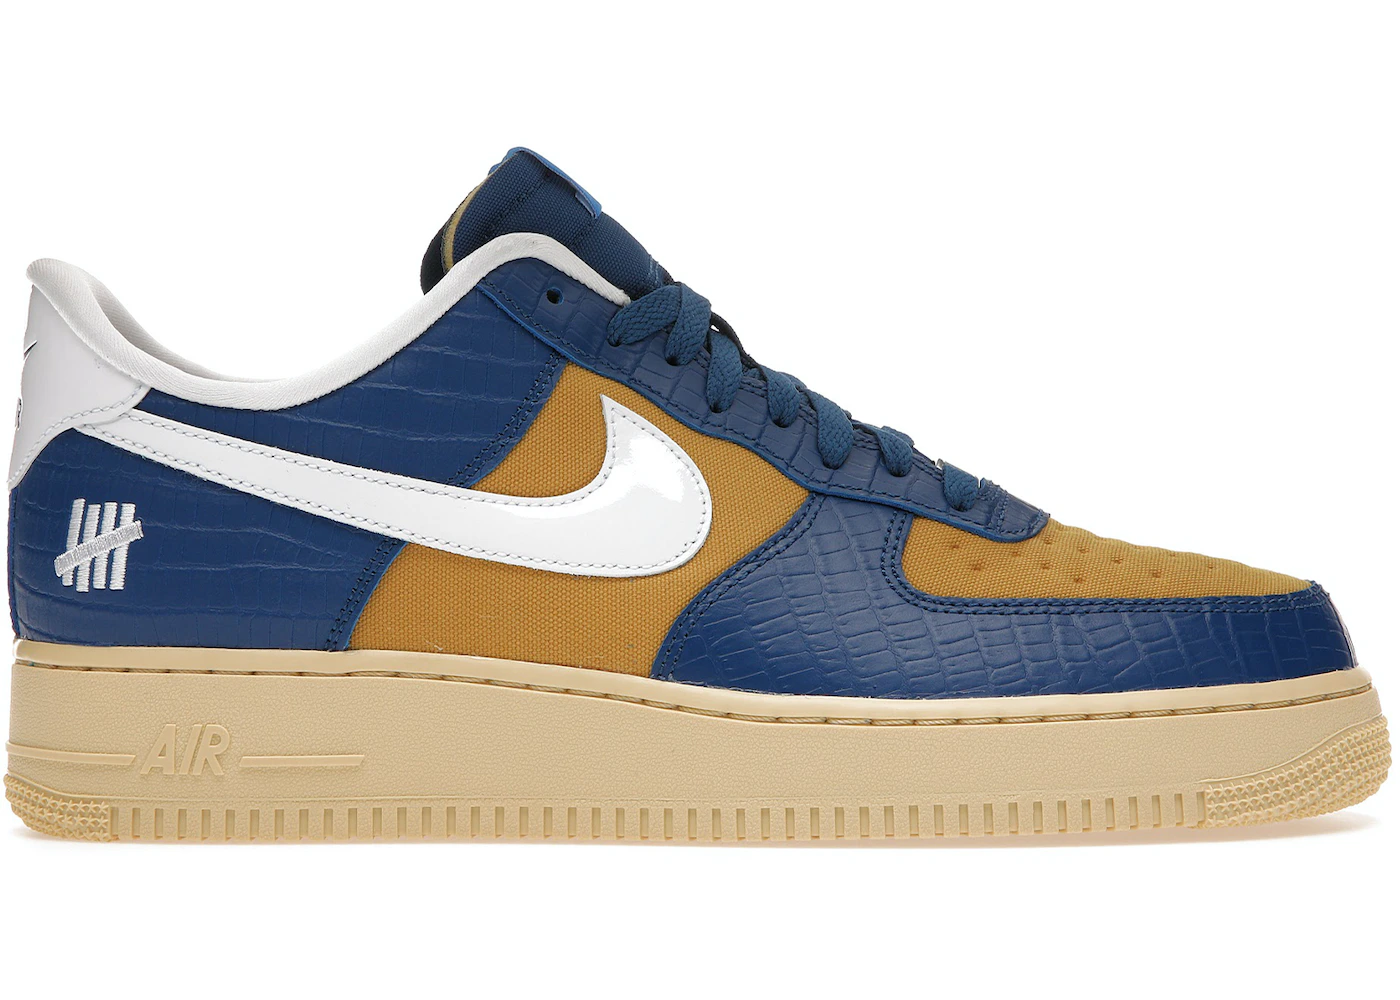 Mispend scout Farthest Nike Air Force 1 Low SP Undefeated 5 On It Blue Yellow Croc - DM8462-400 -  US